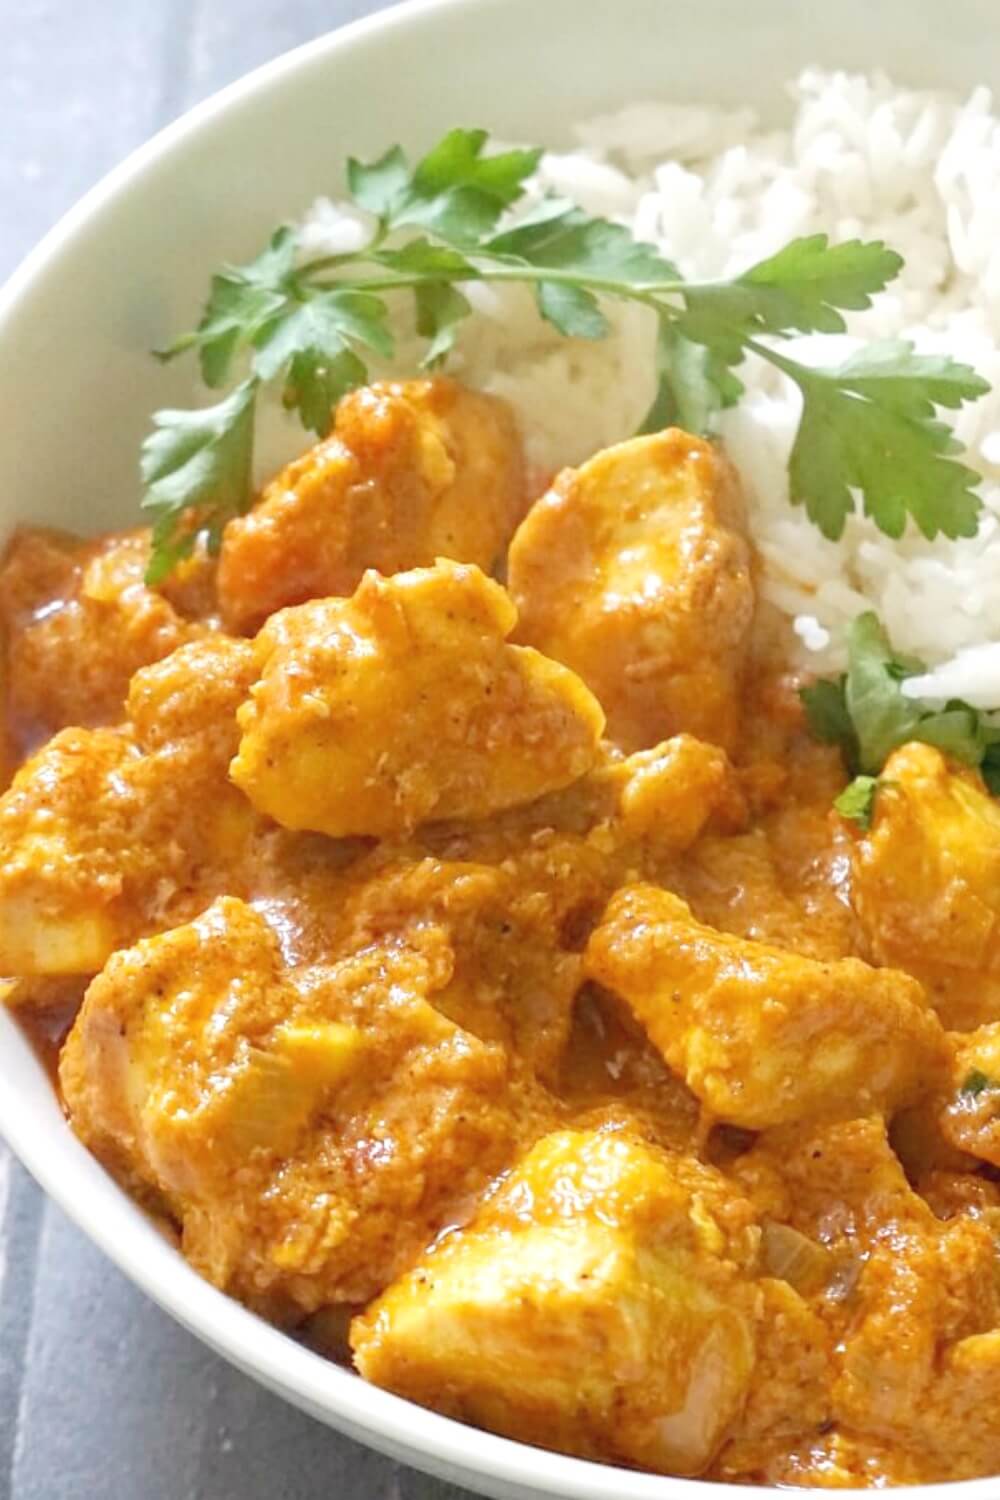 Indian Chicken Curry with Coconut Milk, a quick and easy recipe that is ready in about 30 minutes. Boneless chicken breast simmed in a rich and flavourful tomato and coconut sauce, with mild spices that give it an earthy touch, this chicken curry is a perfect midweek dinner recipe for the whole family. Nothing beats a homemade curry, and my recipe is simple anf failproof, that anyone can cook it to perfection. #chickencurry, #coconutmilk, #indiancurry, #comfortfood, #dinnerrecipe, #30minutemeals